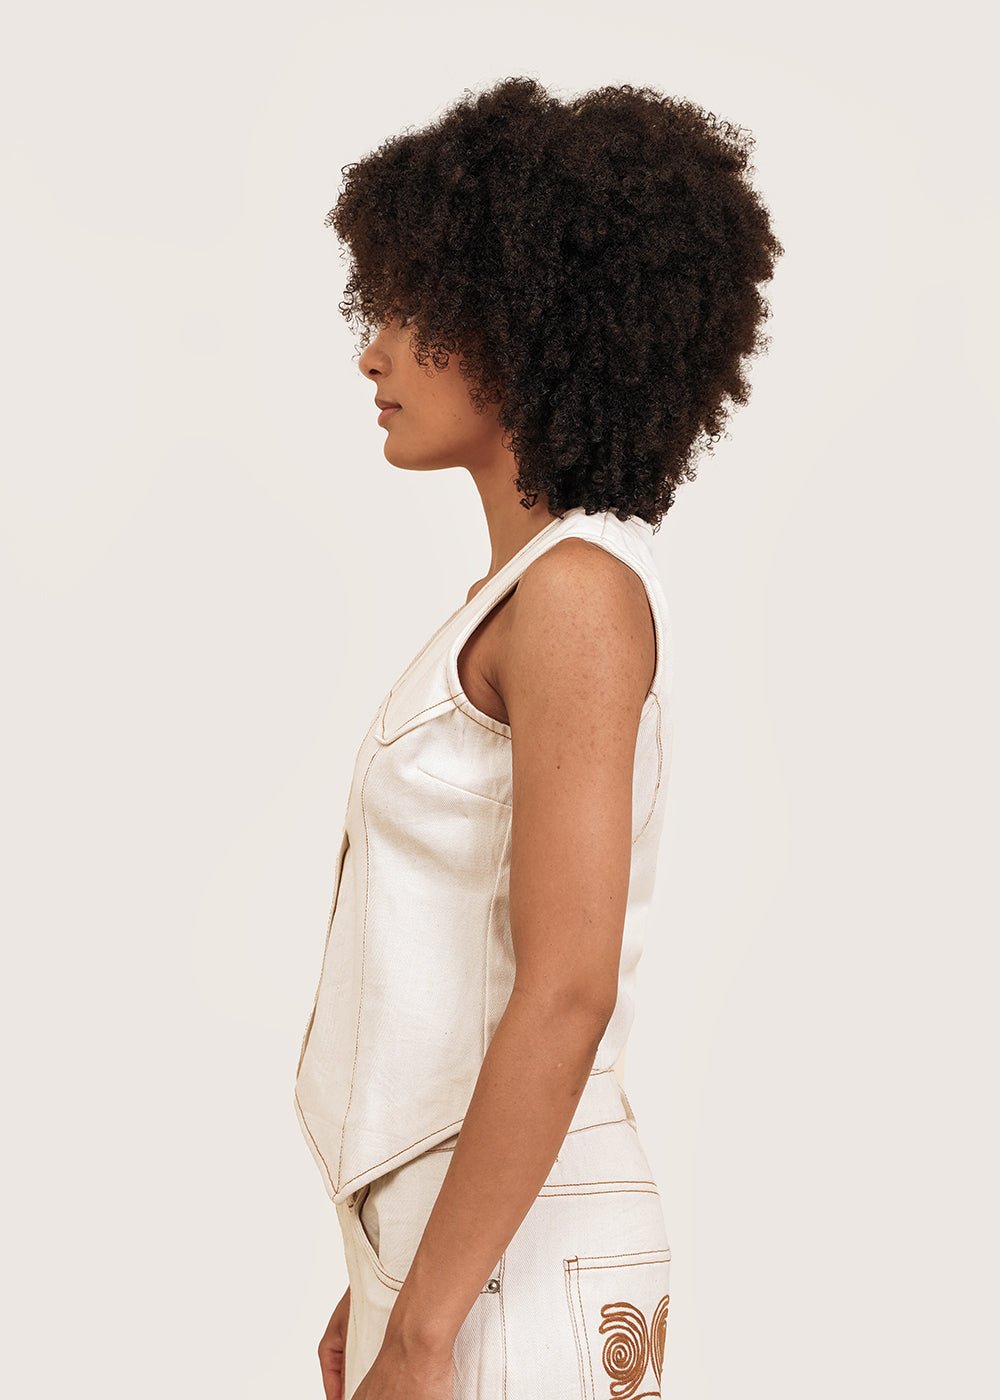 Ajaie Alaie Undyed Vest - New Classics Studios Sustainable Ethical Fashion Canada